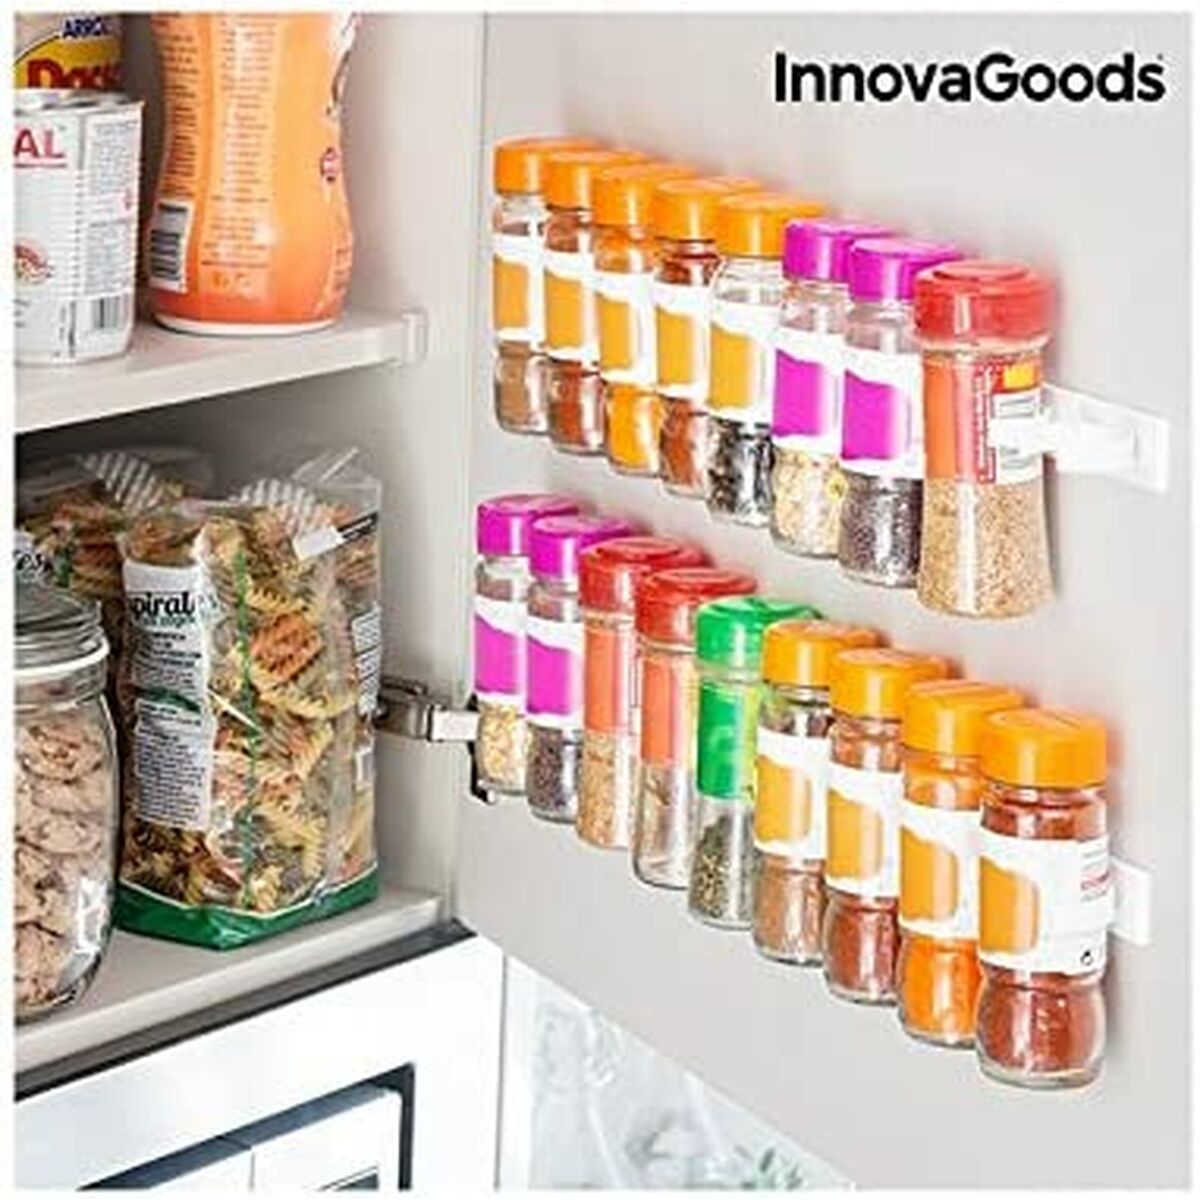 Adhesive and Divisible Spice Organiser InnovaGoods